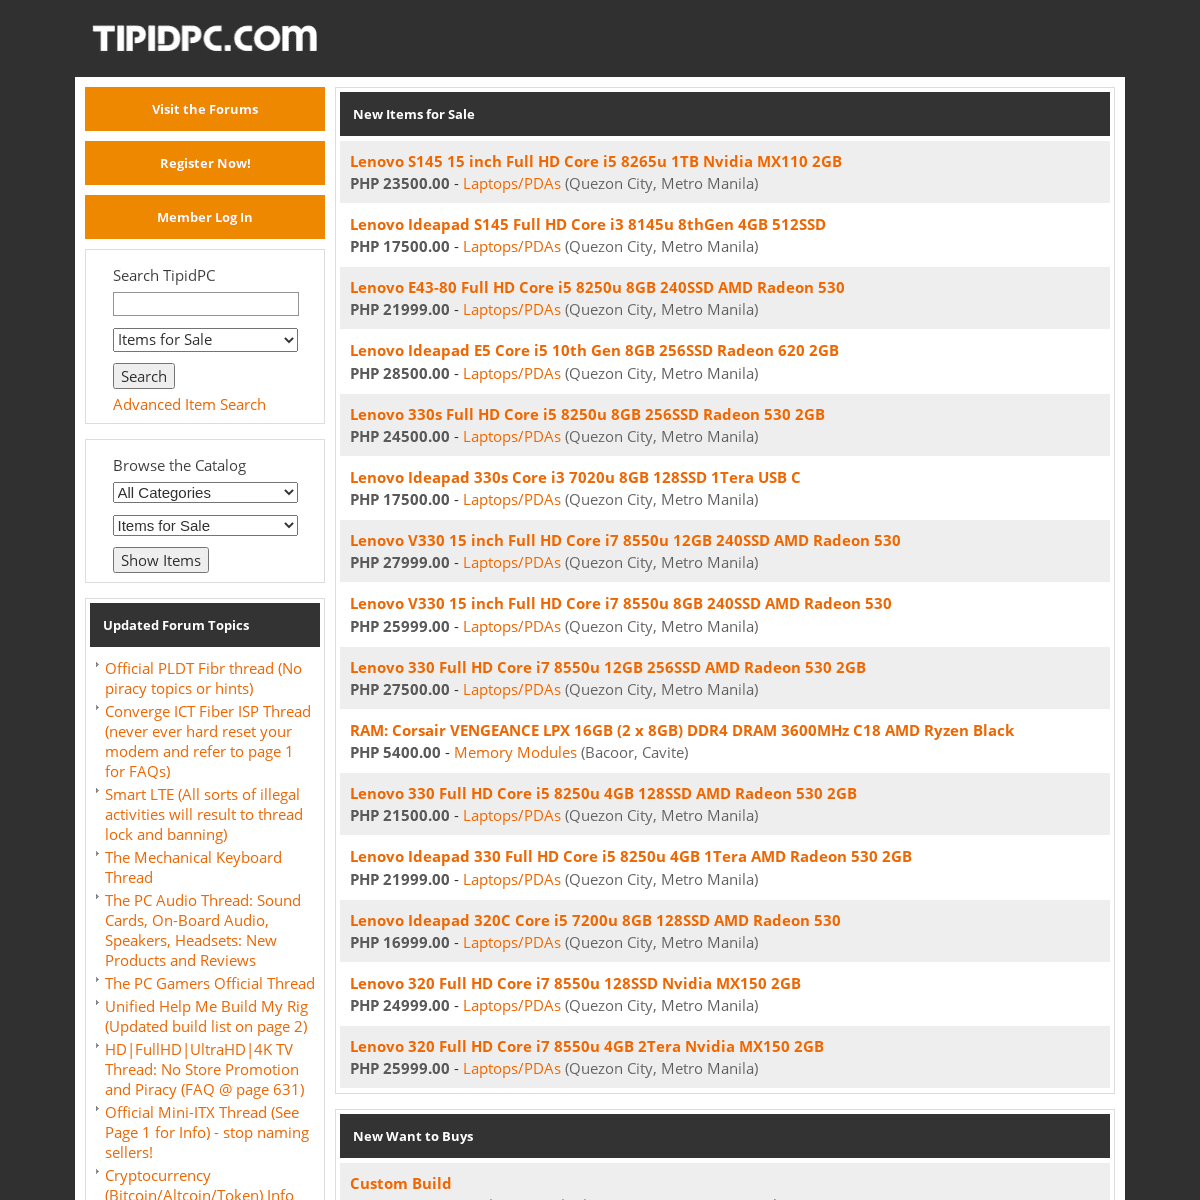 A complete backup of https://tipidpc.com